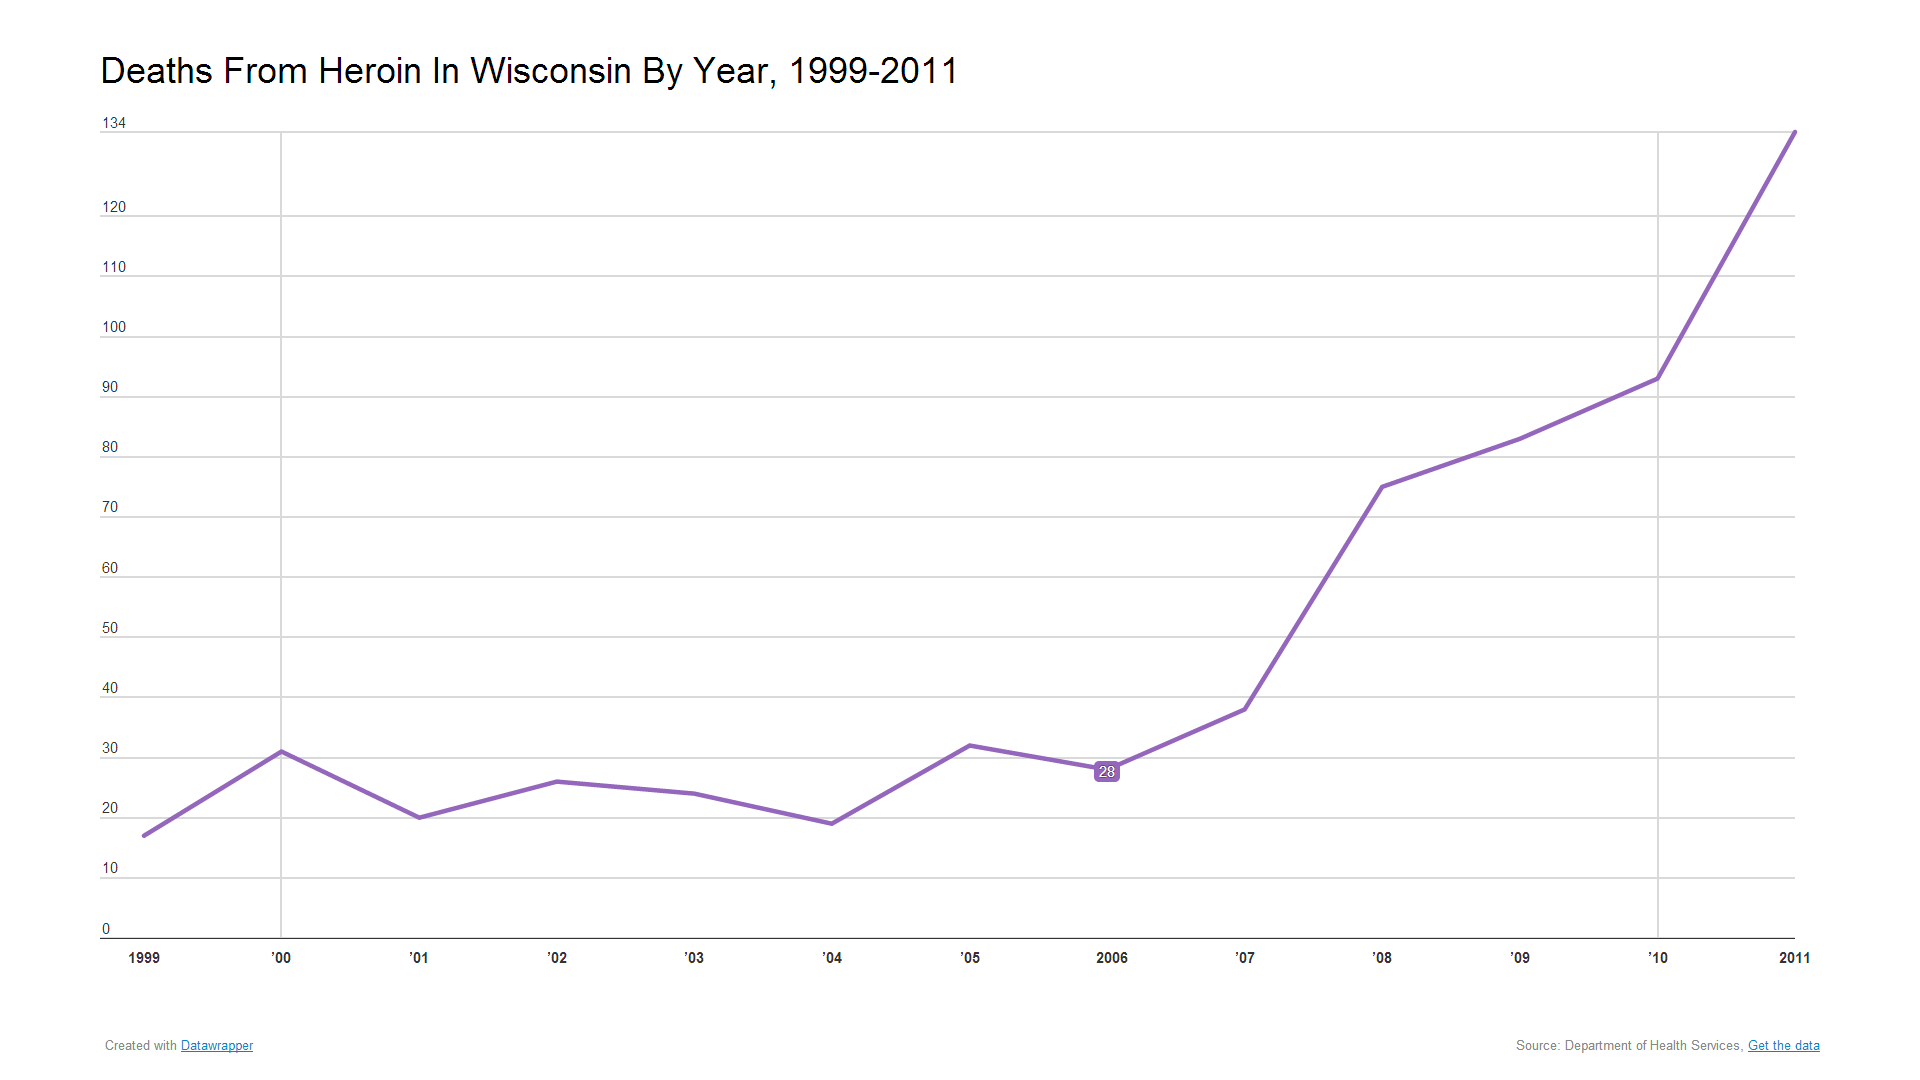 Deaths From Heroin Overdoses Are Increasing In Wisconsin